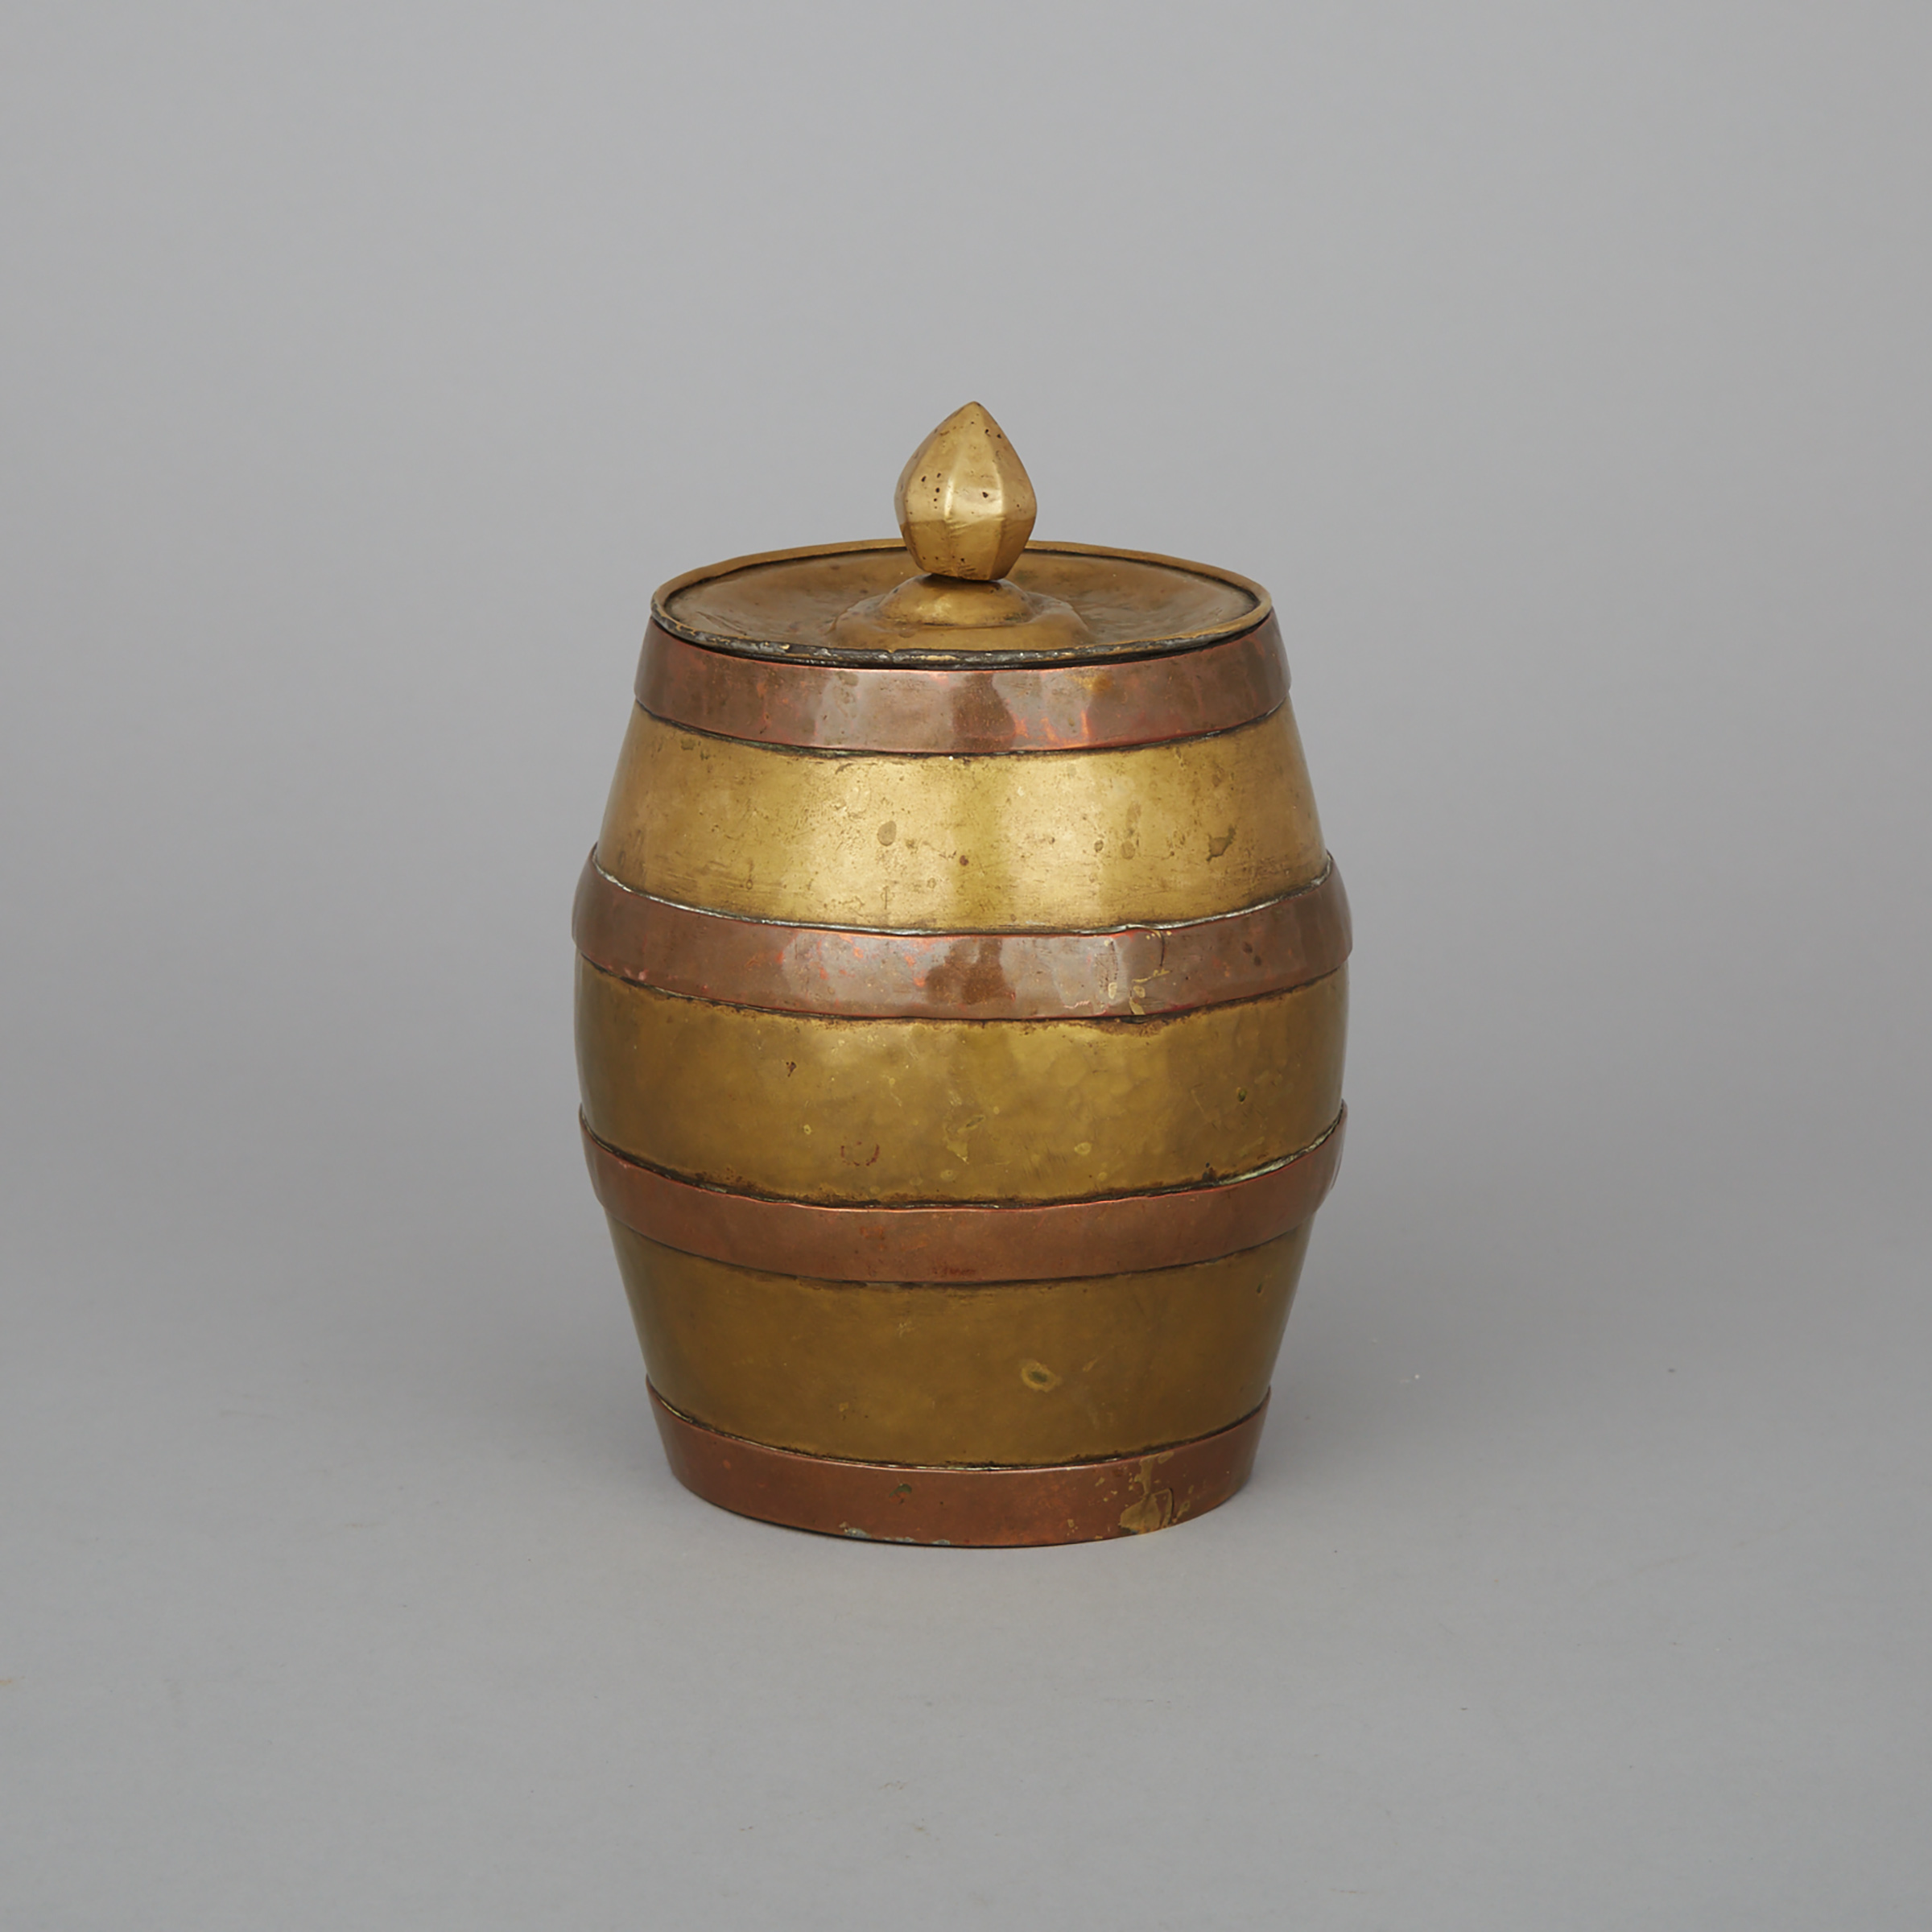 Paul Beau (Canadian, 1871-1941) Brass Tobacco Jar, Montreal, early 20th century